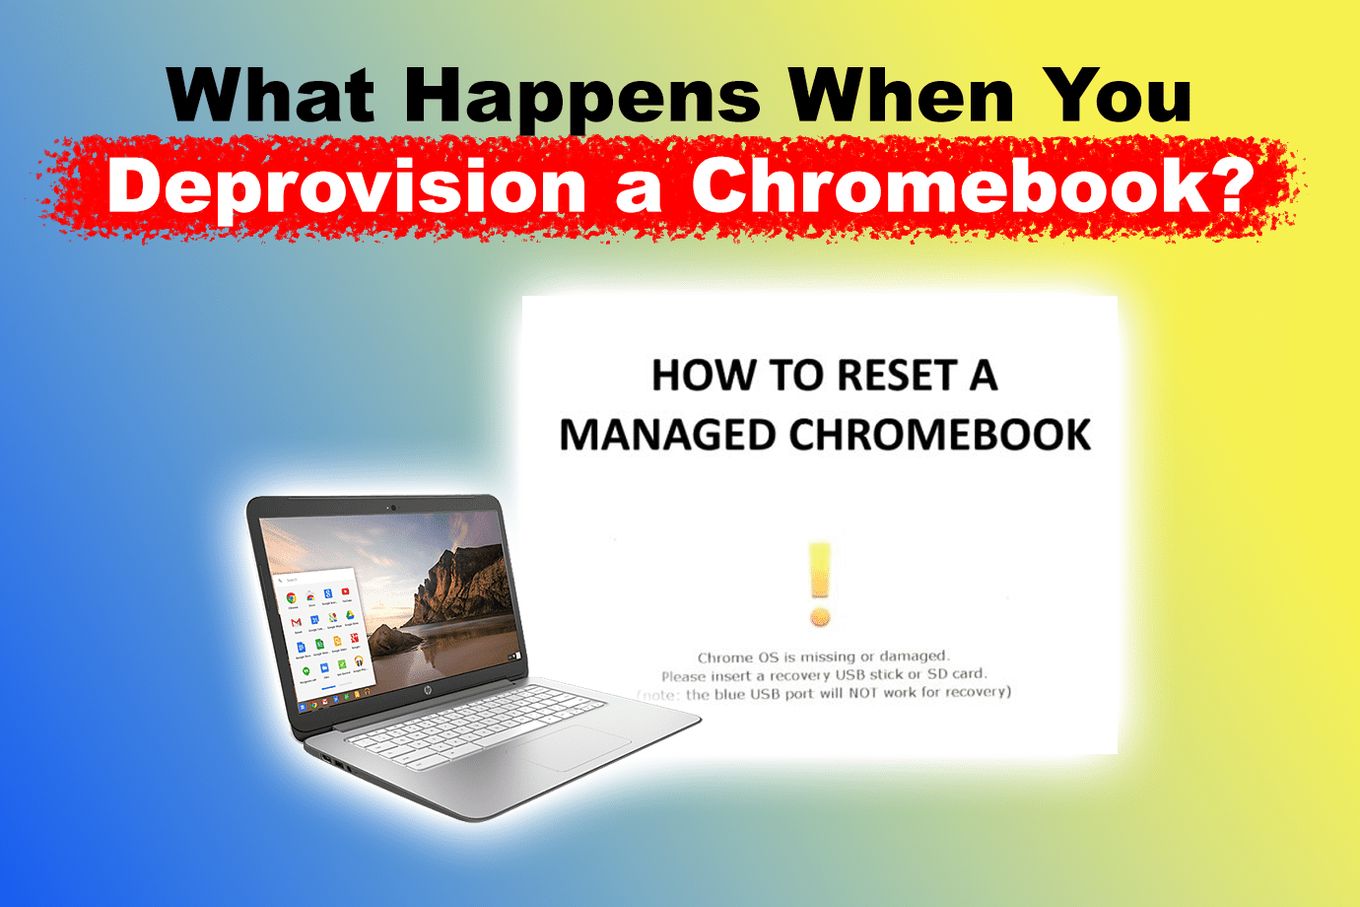 What Happens After Chromebook Deprovisioning